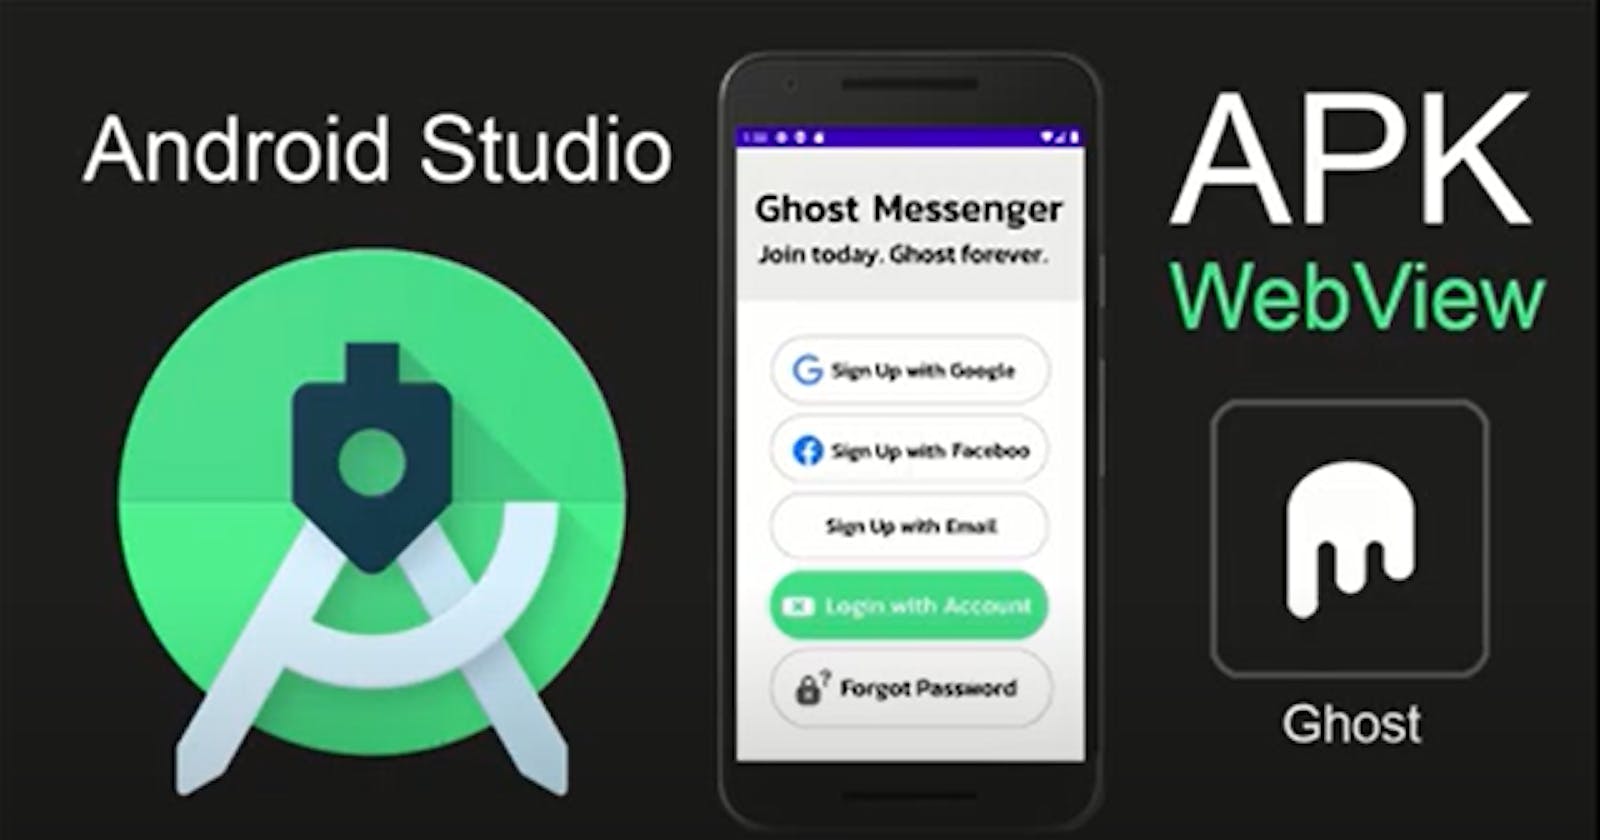 How to create WebView App / build APK file / run in emulator  Using the Android Studio WebView.